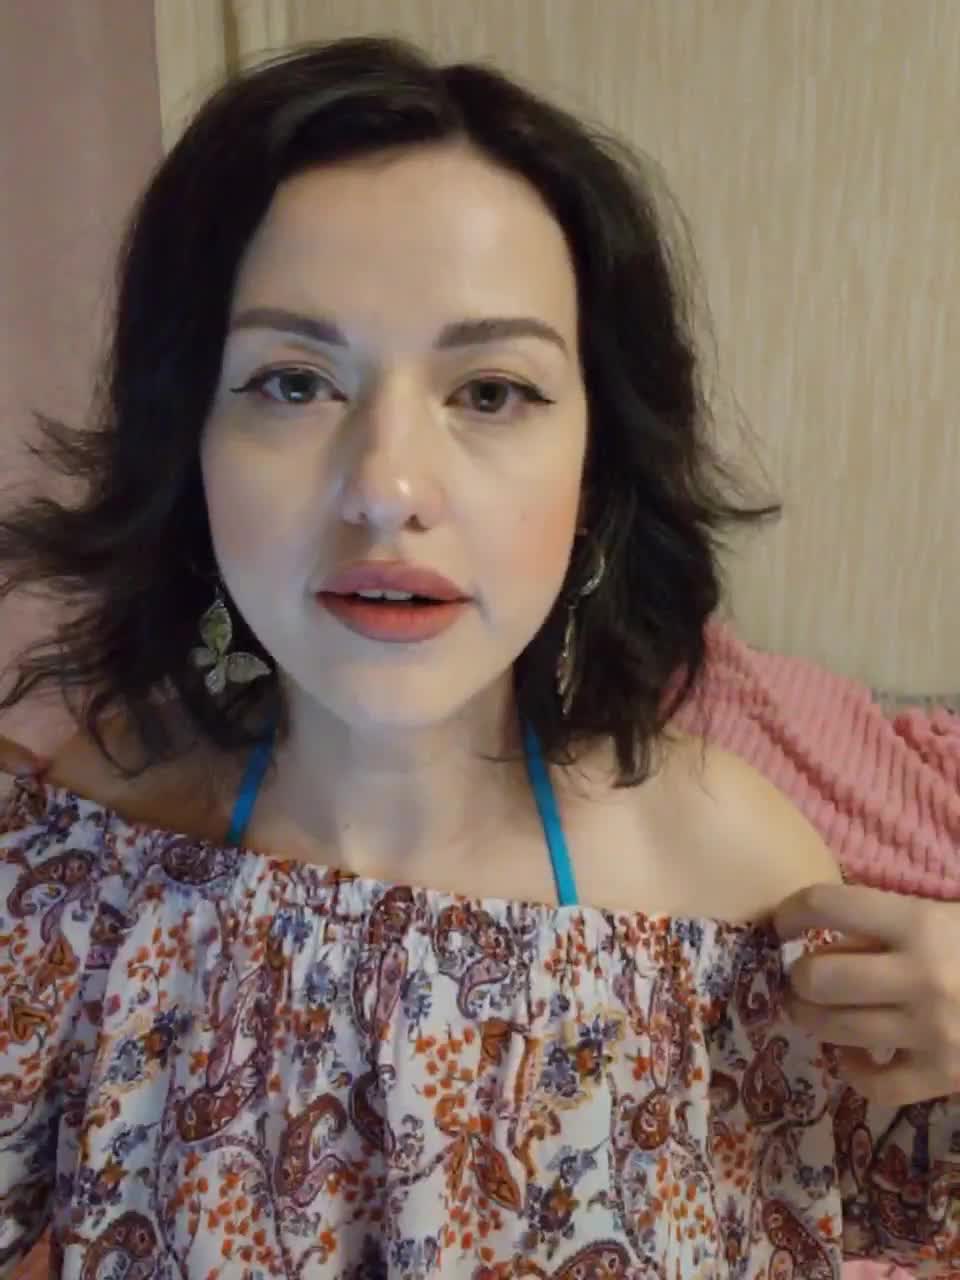 View or download file monicagaztambide on 2023-03-01 from bongacams